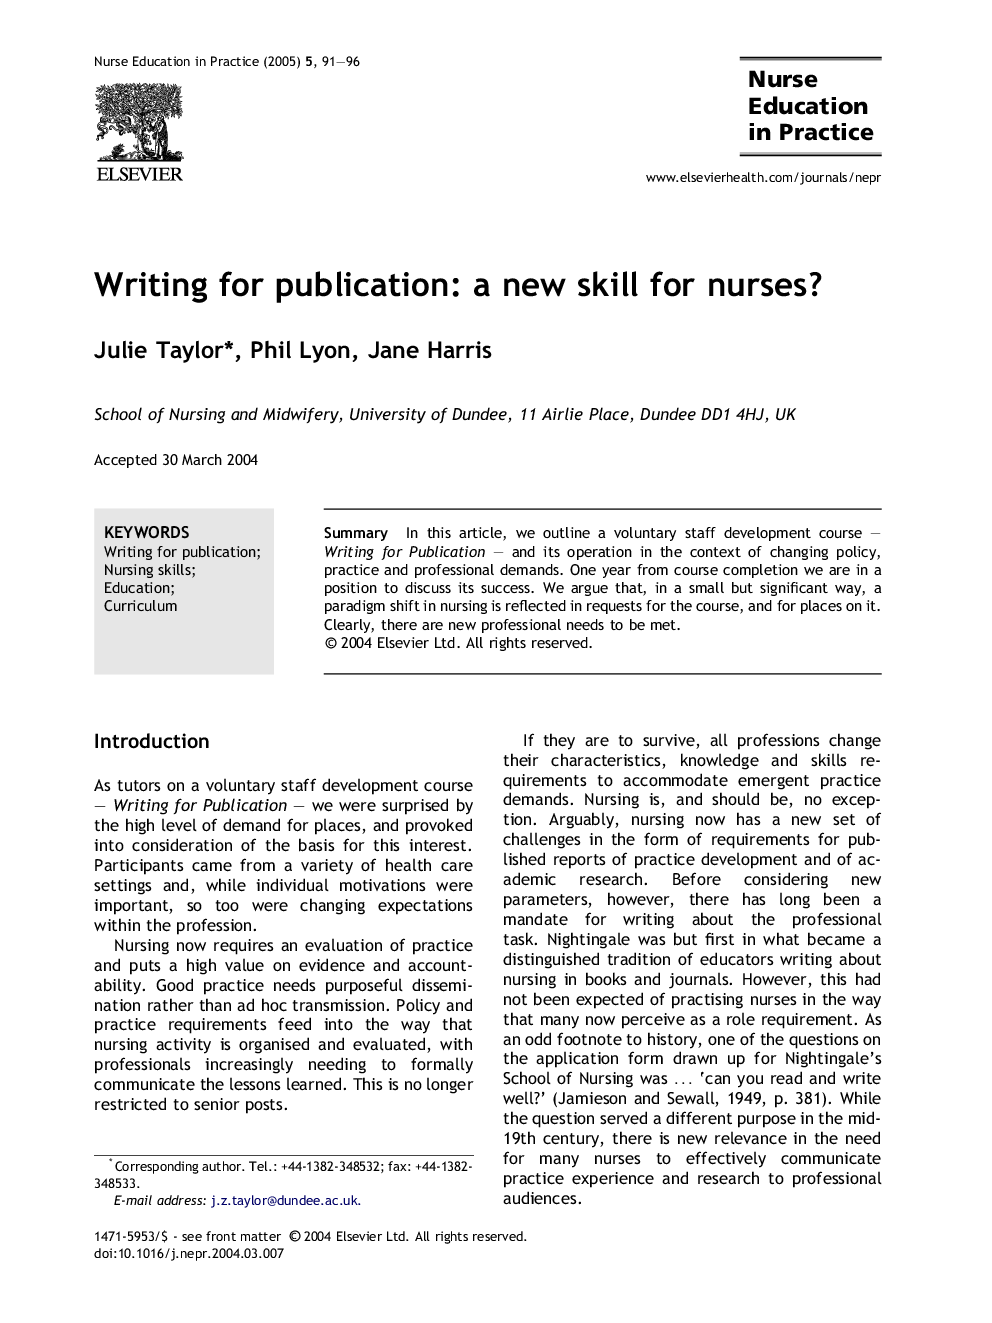 Writing for publication: a new skill for nurses?